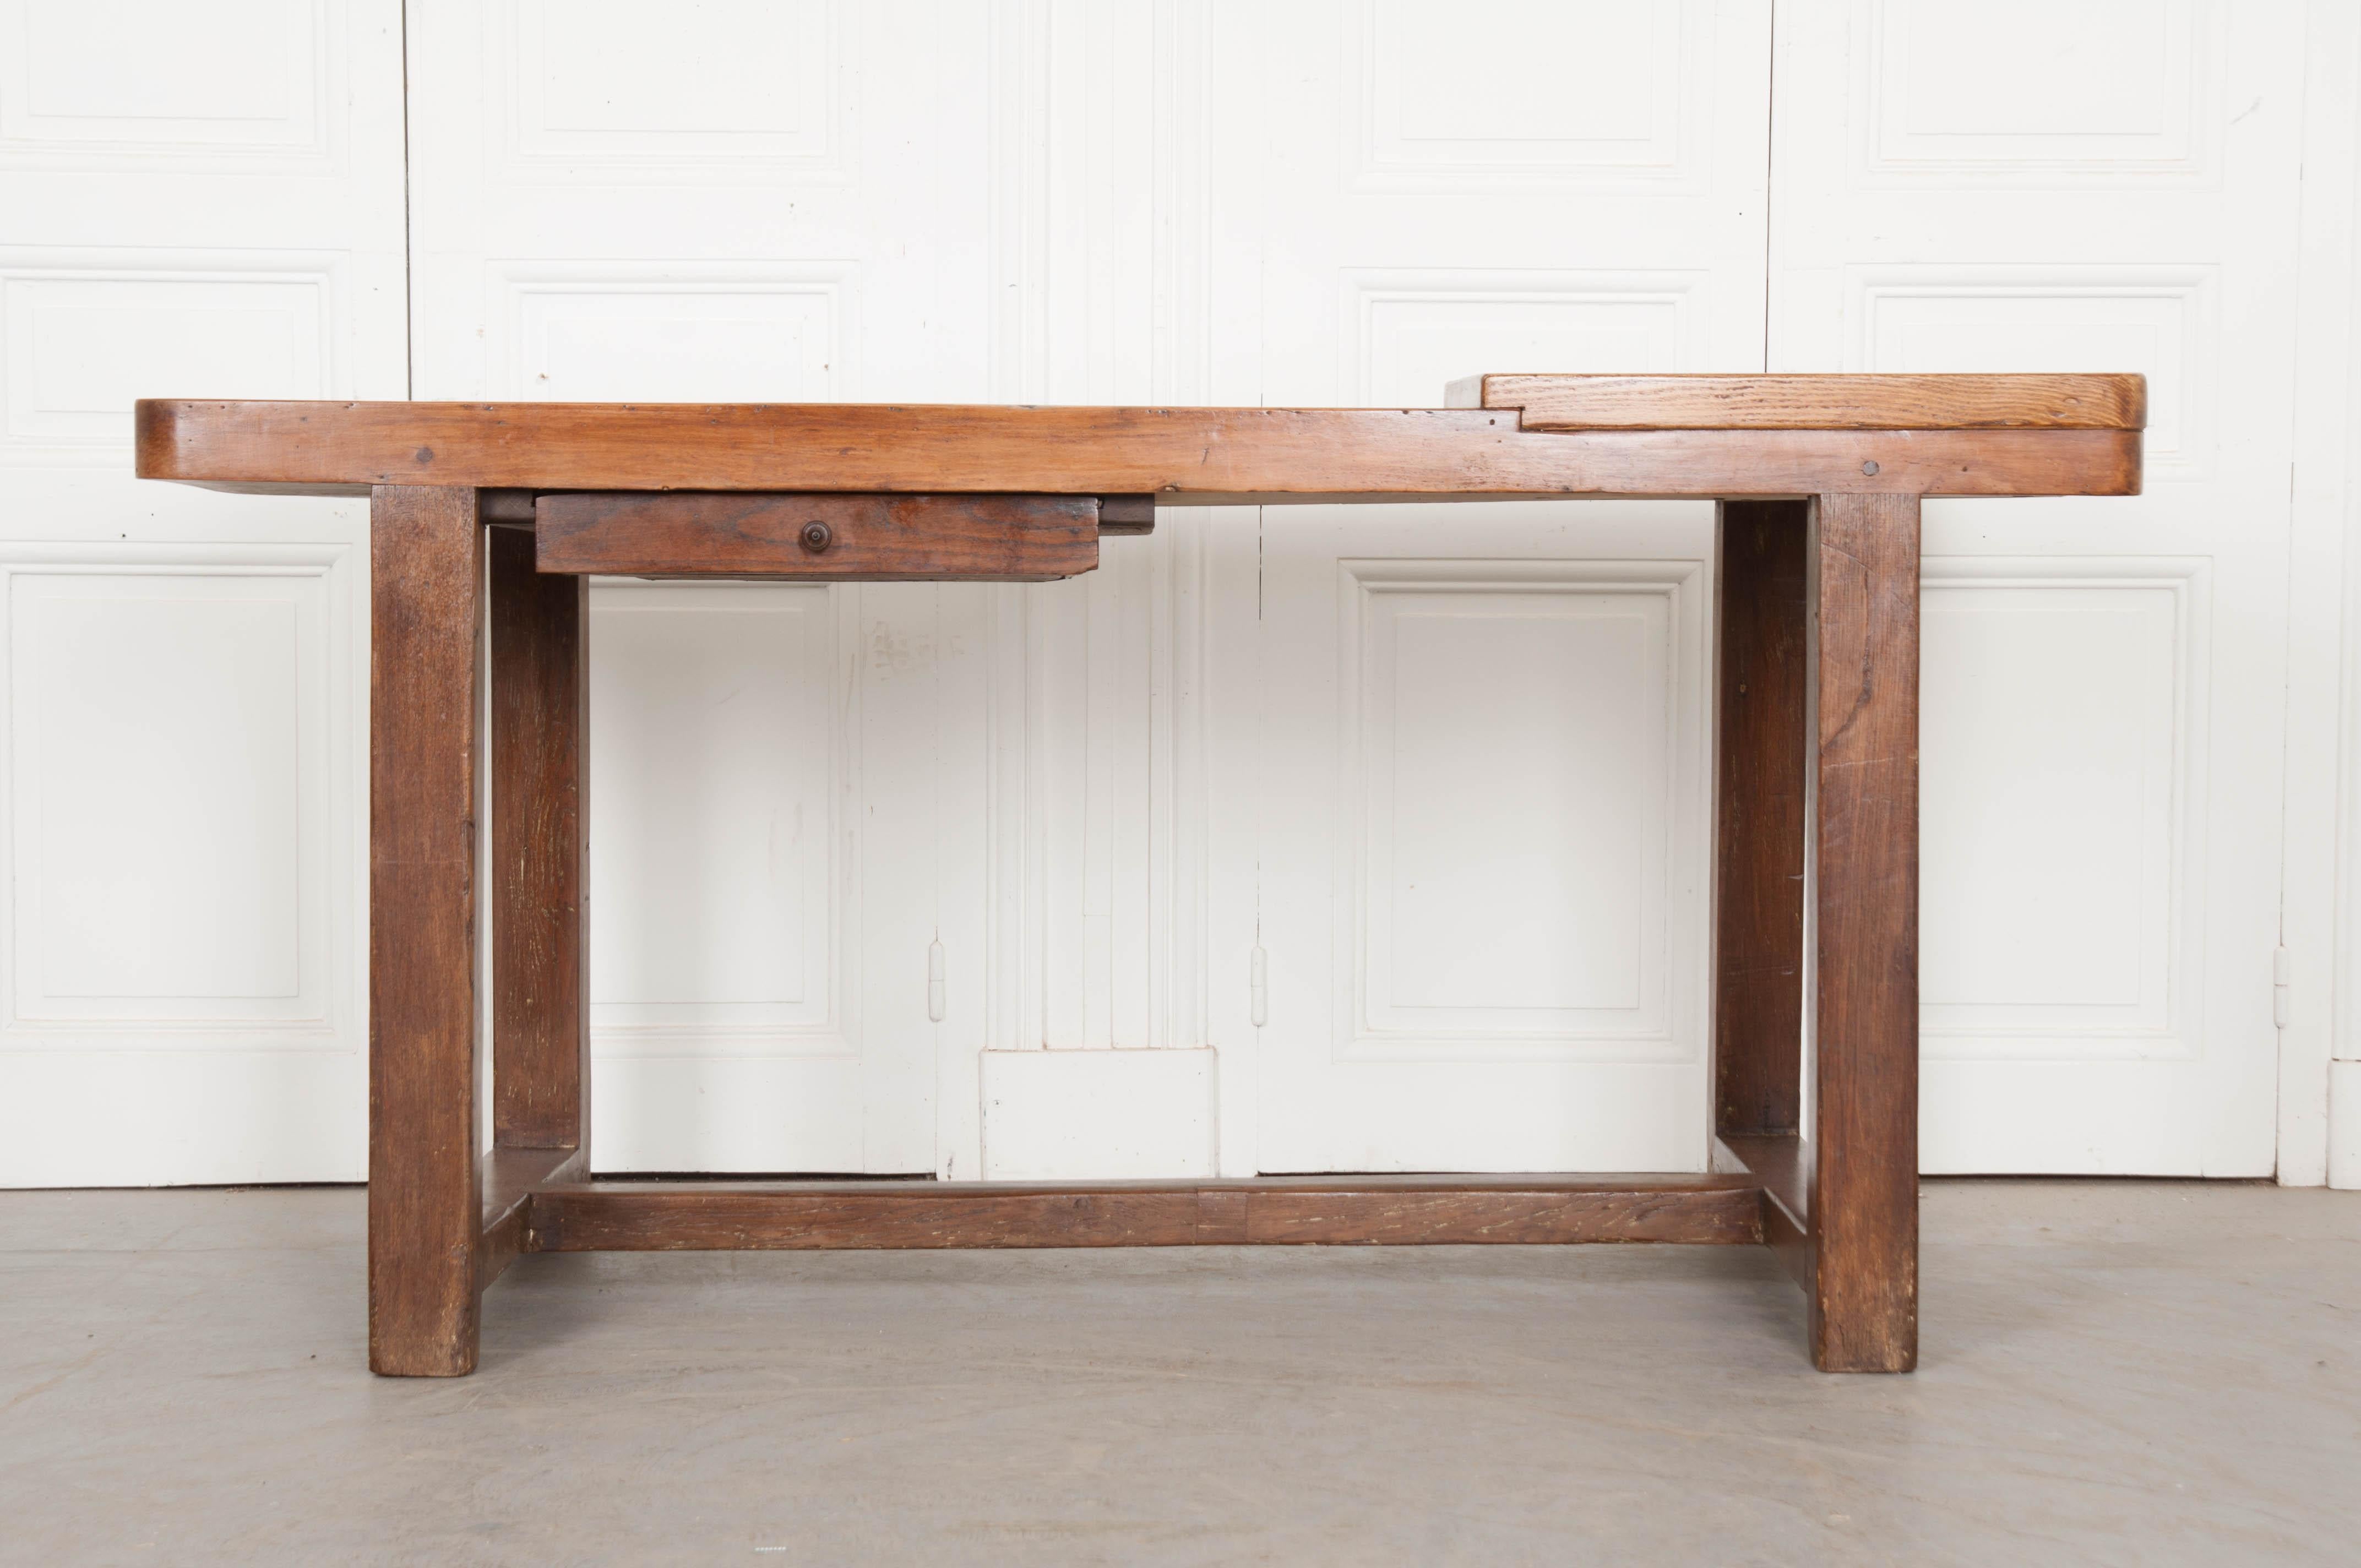 A Burgundian table for creating and enjoying! This exceptional French worktable features a beech top, with cutting board, and an oak base that is outfitted with a single drawer. The top has rounded corners and contains unique and thoughtful repairs